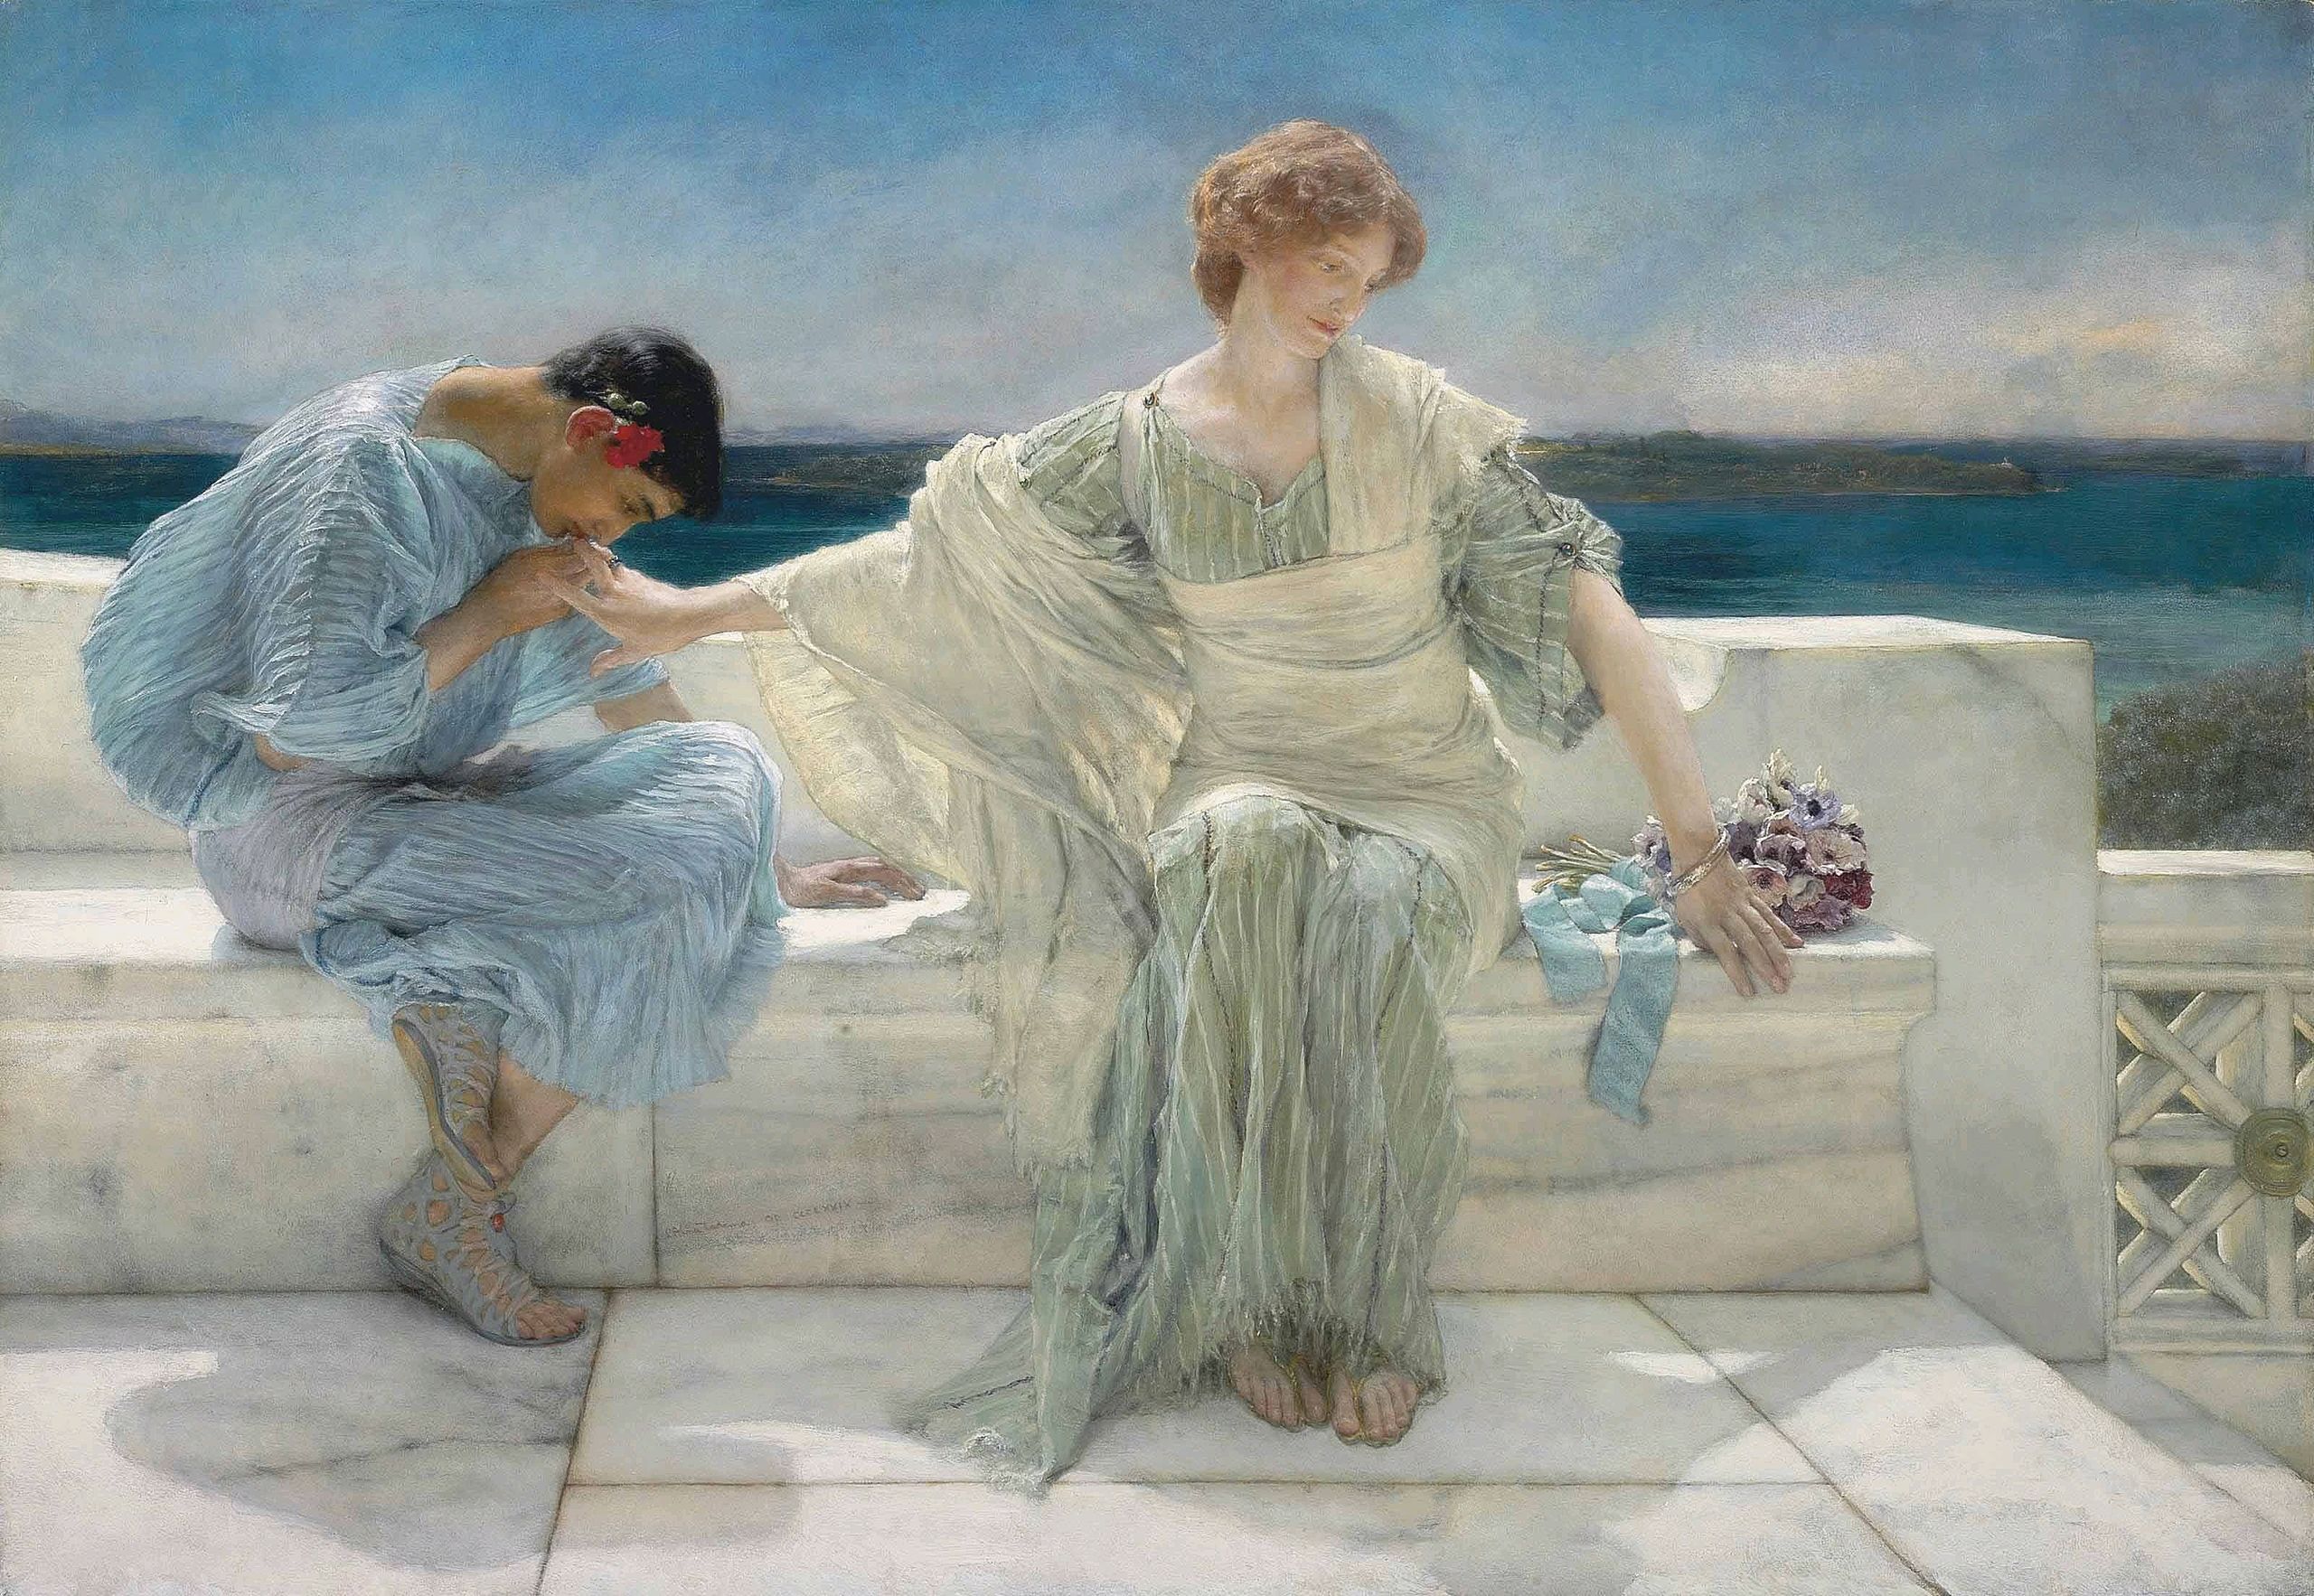 Ask Me No More by Lawrence Alma-Tadema - 1906 - 78.8 x 113.6 cm private collection